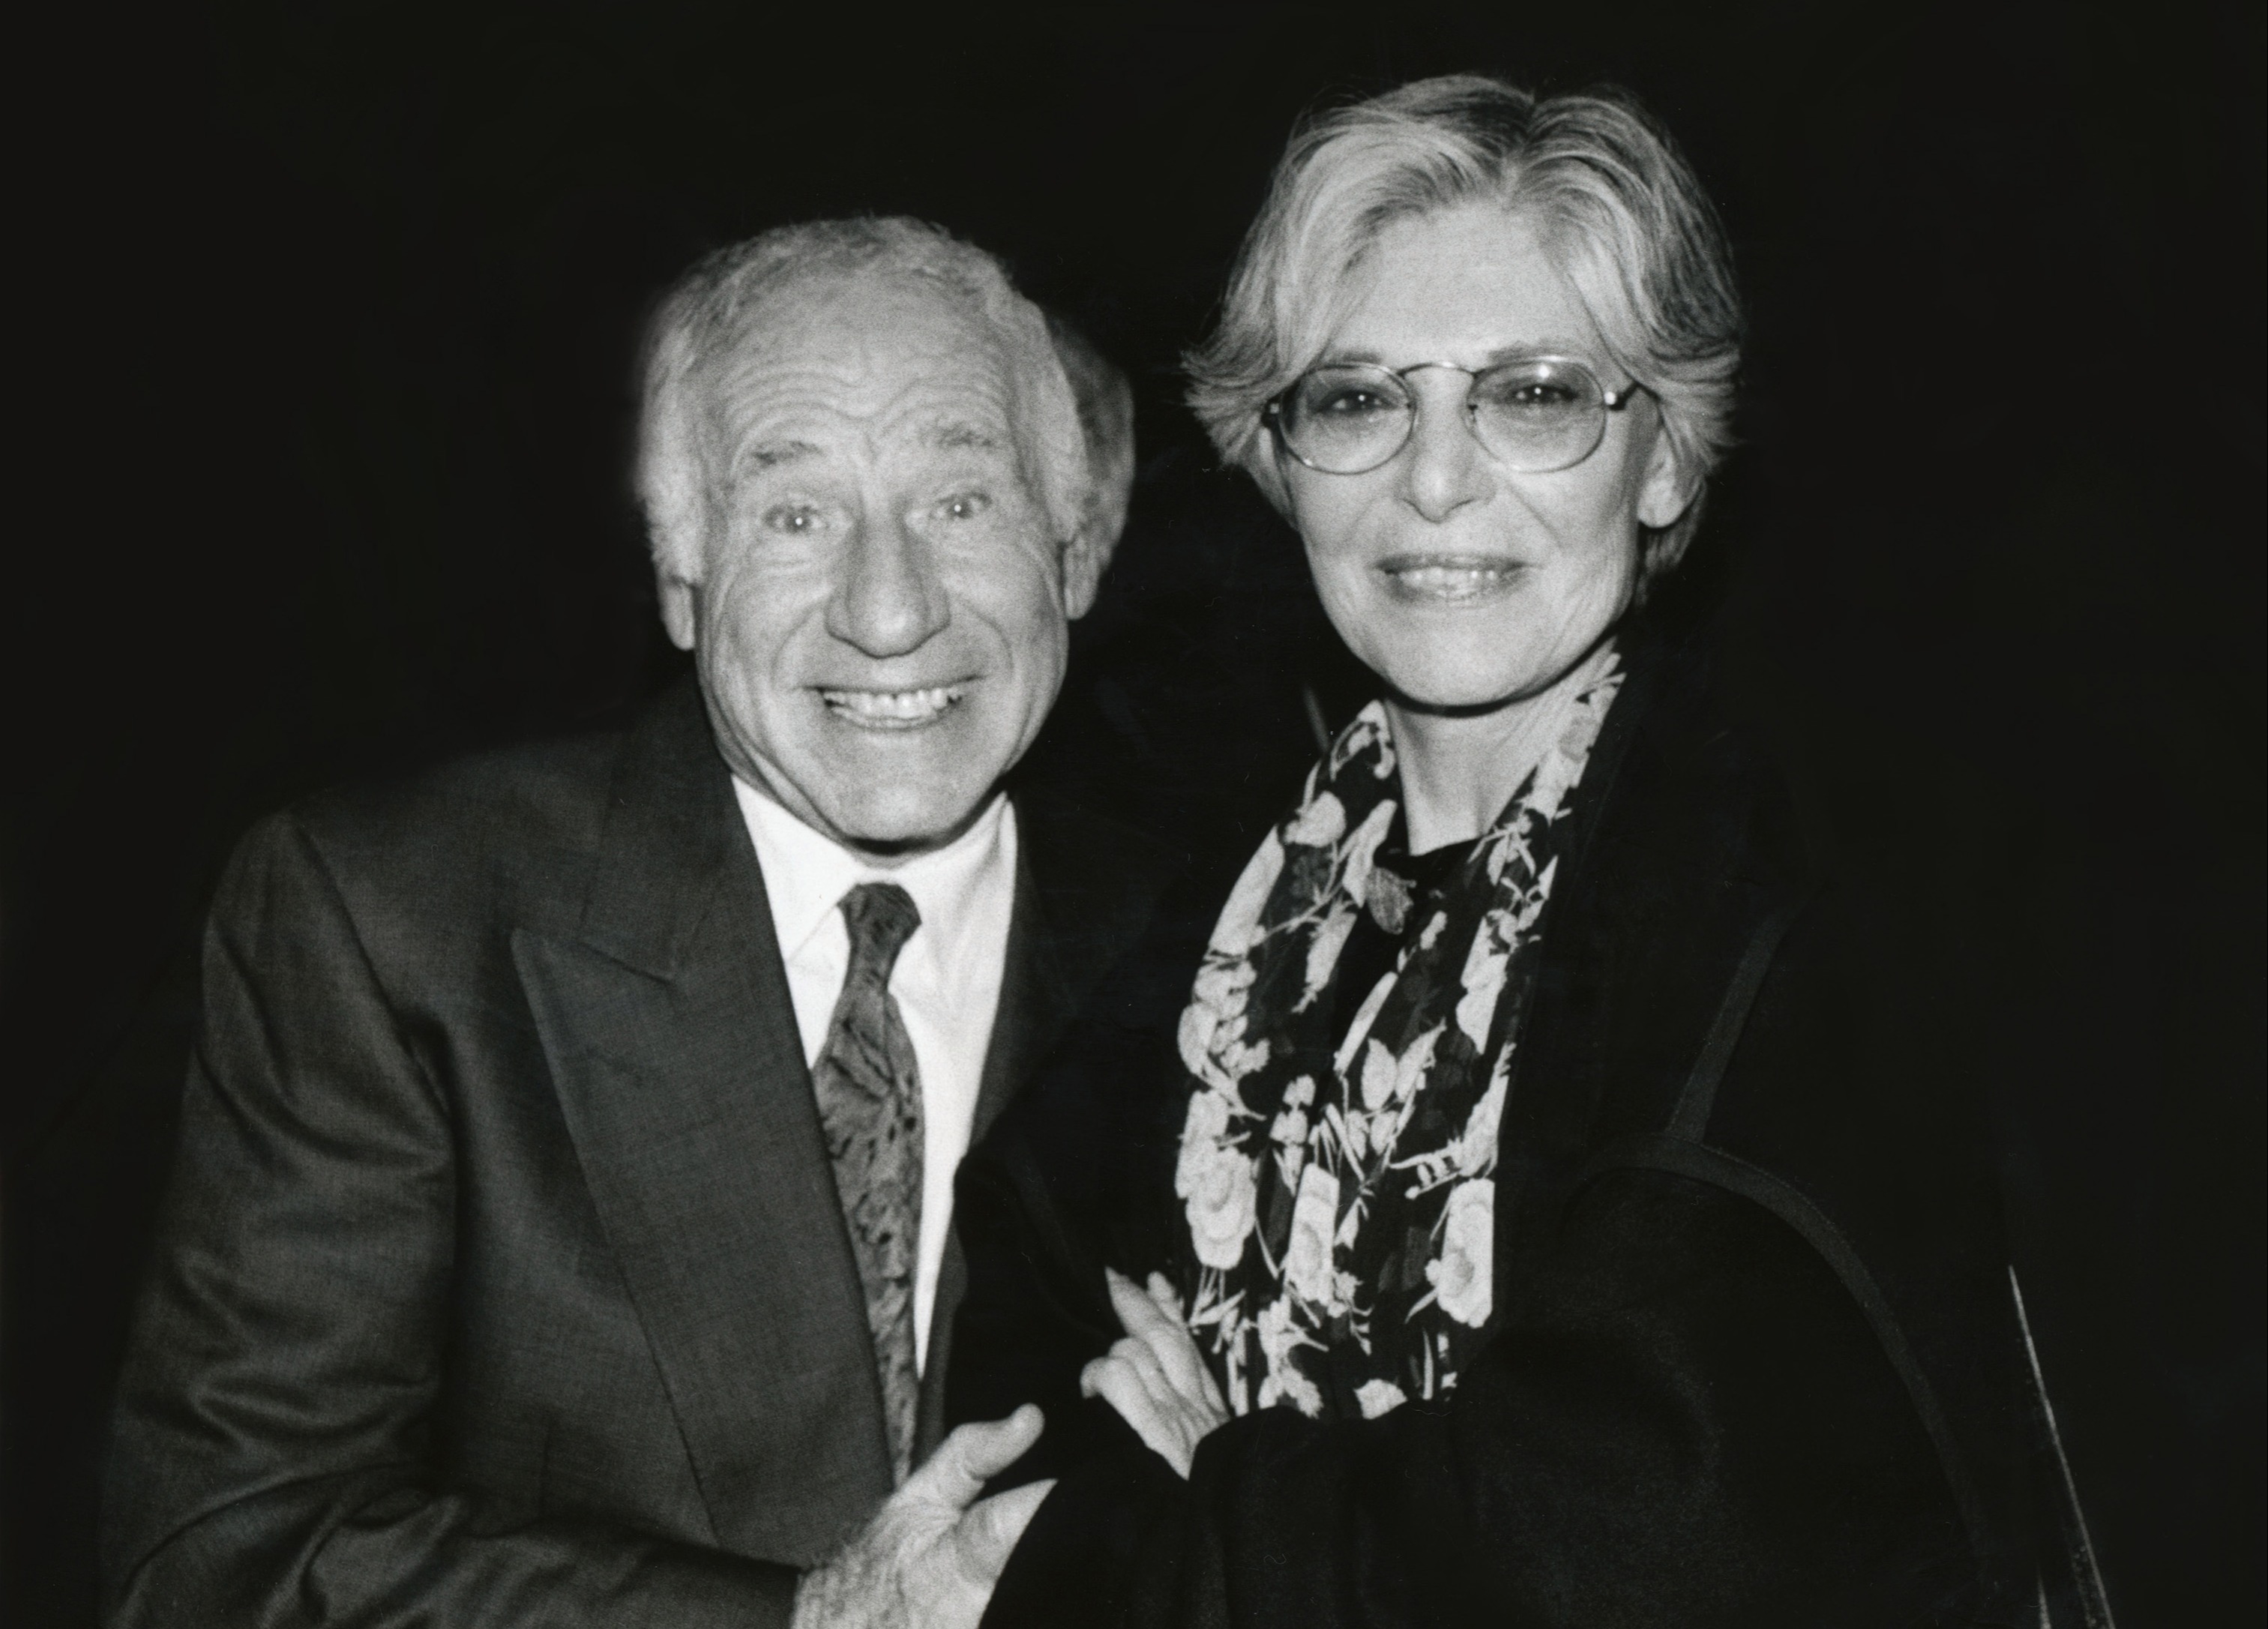 How long were Mel Brooks and Anne Bancroft married? The US Sun